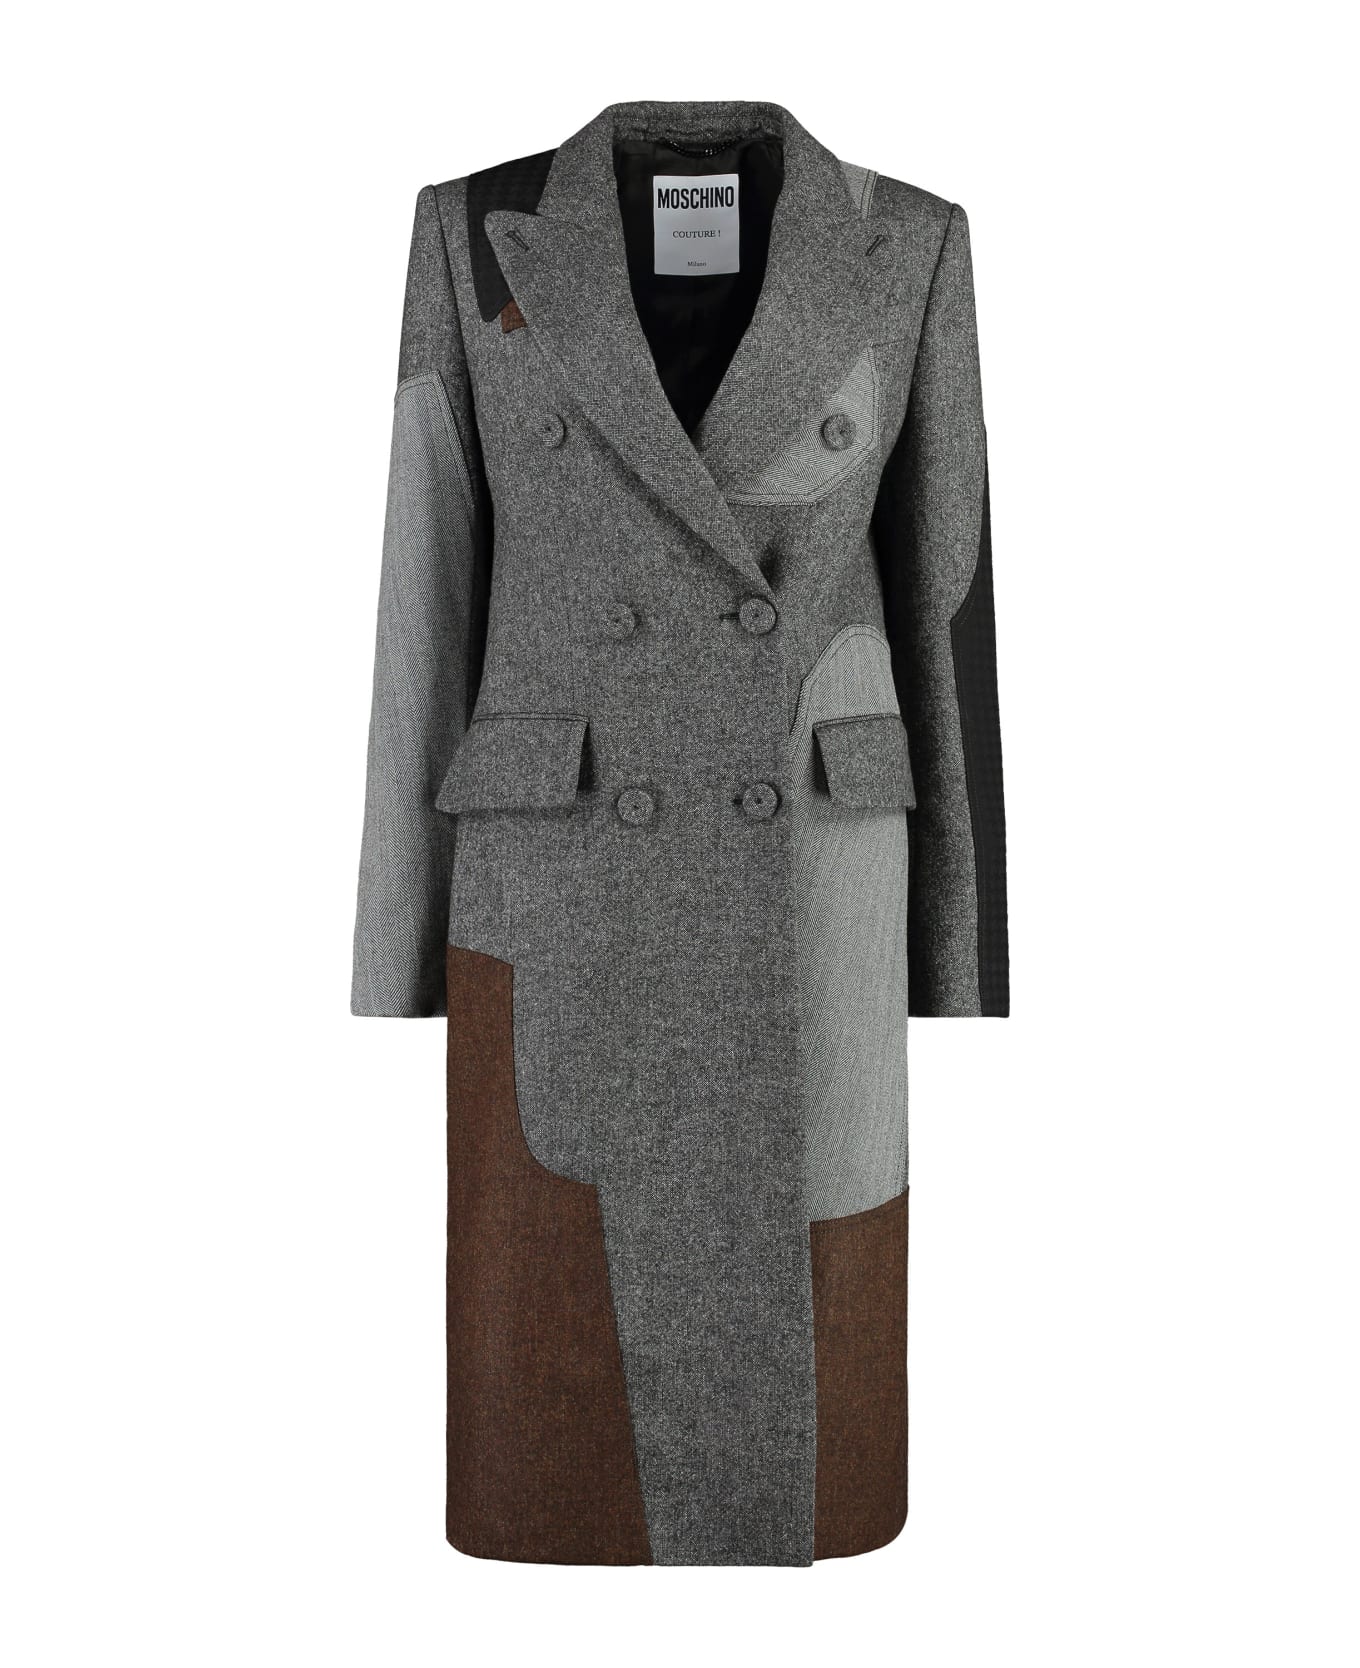 Moschino Contrasting Detail Coat - grey